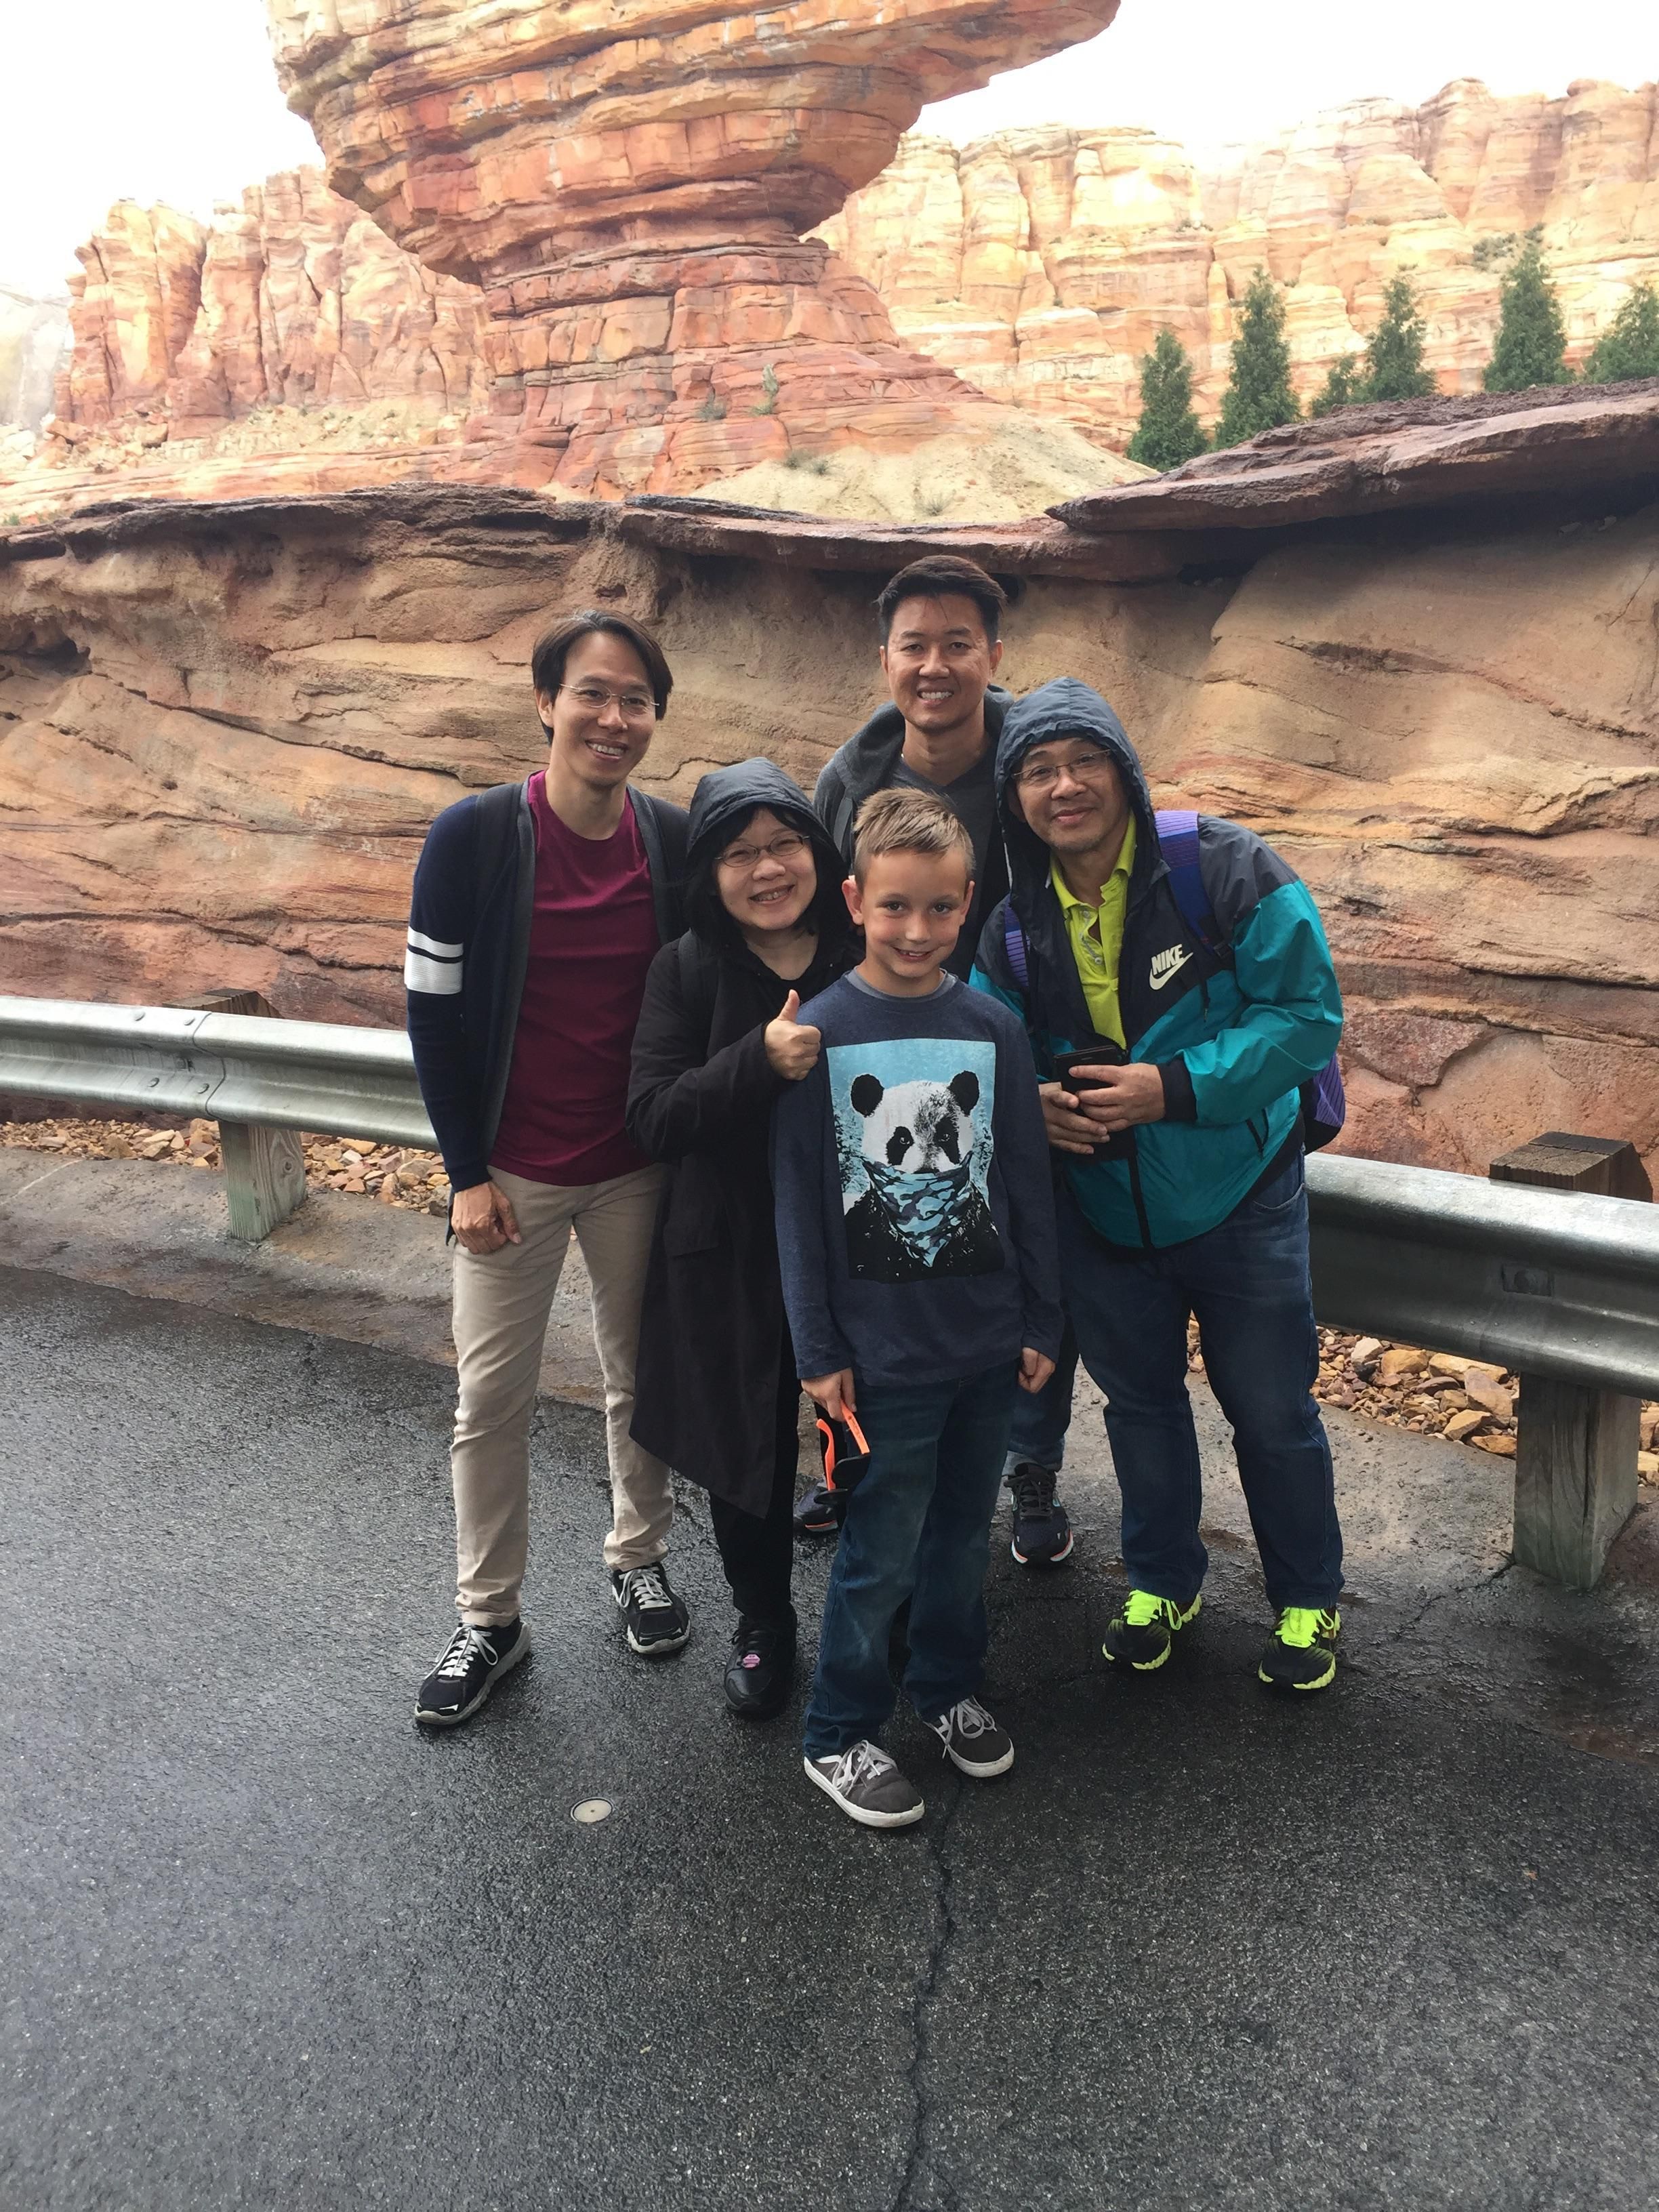 My son was asked to take a picture of a nice Asian family at Disneyland....he did not understand